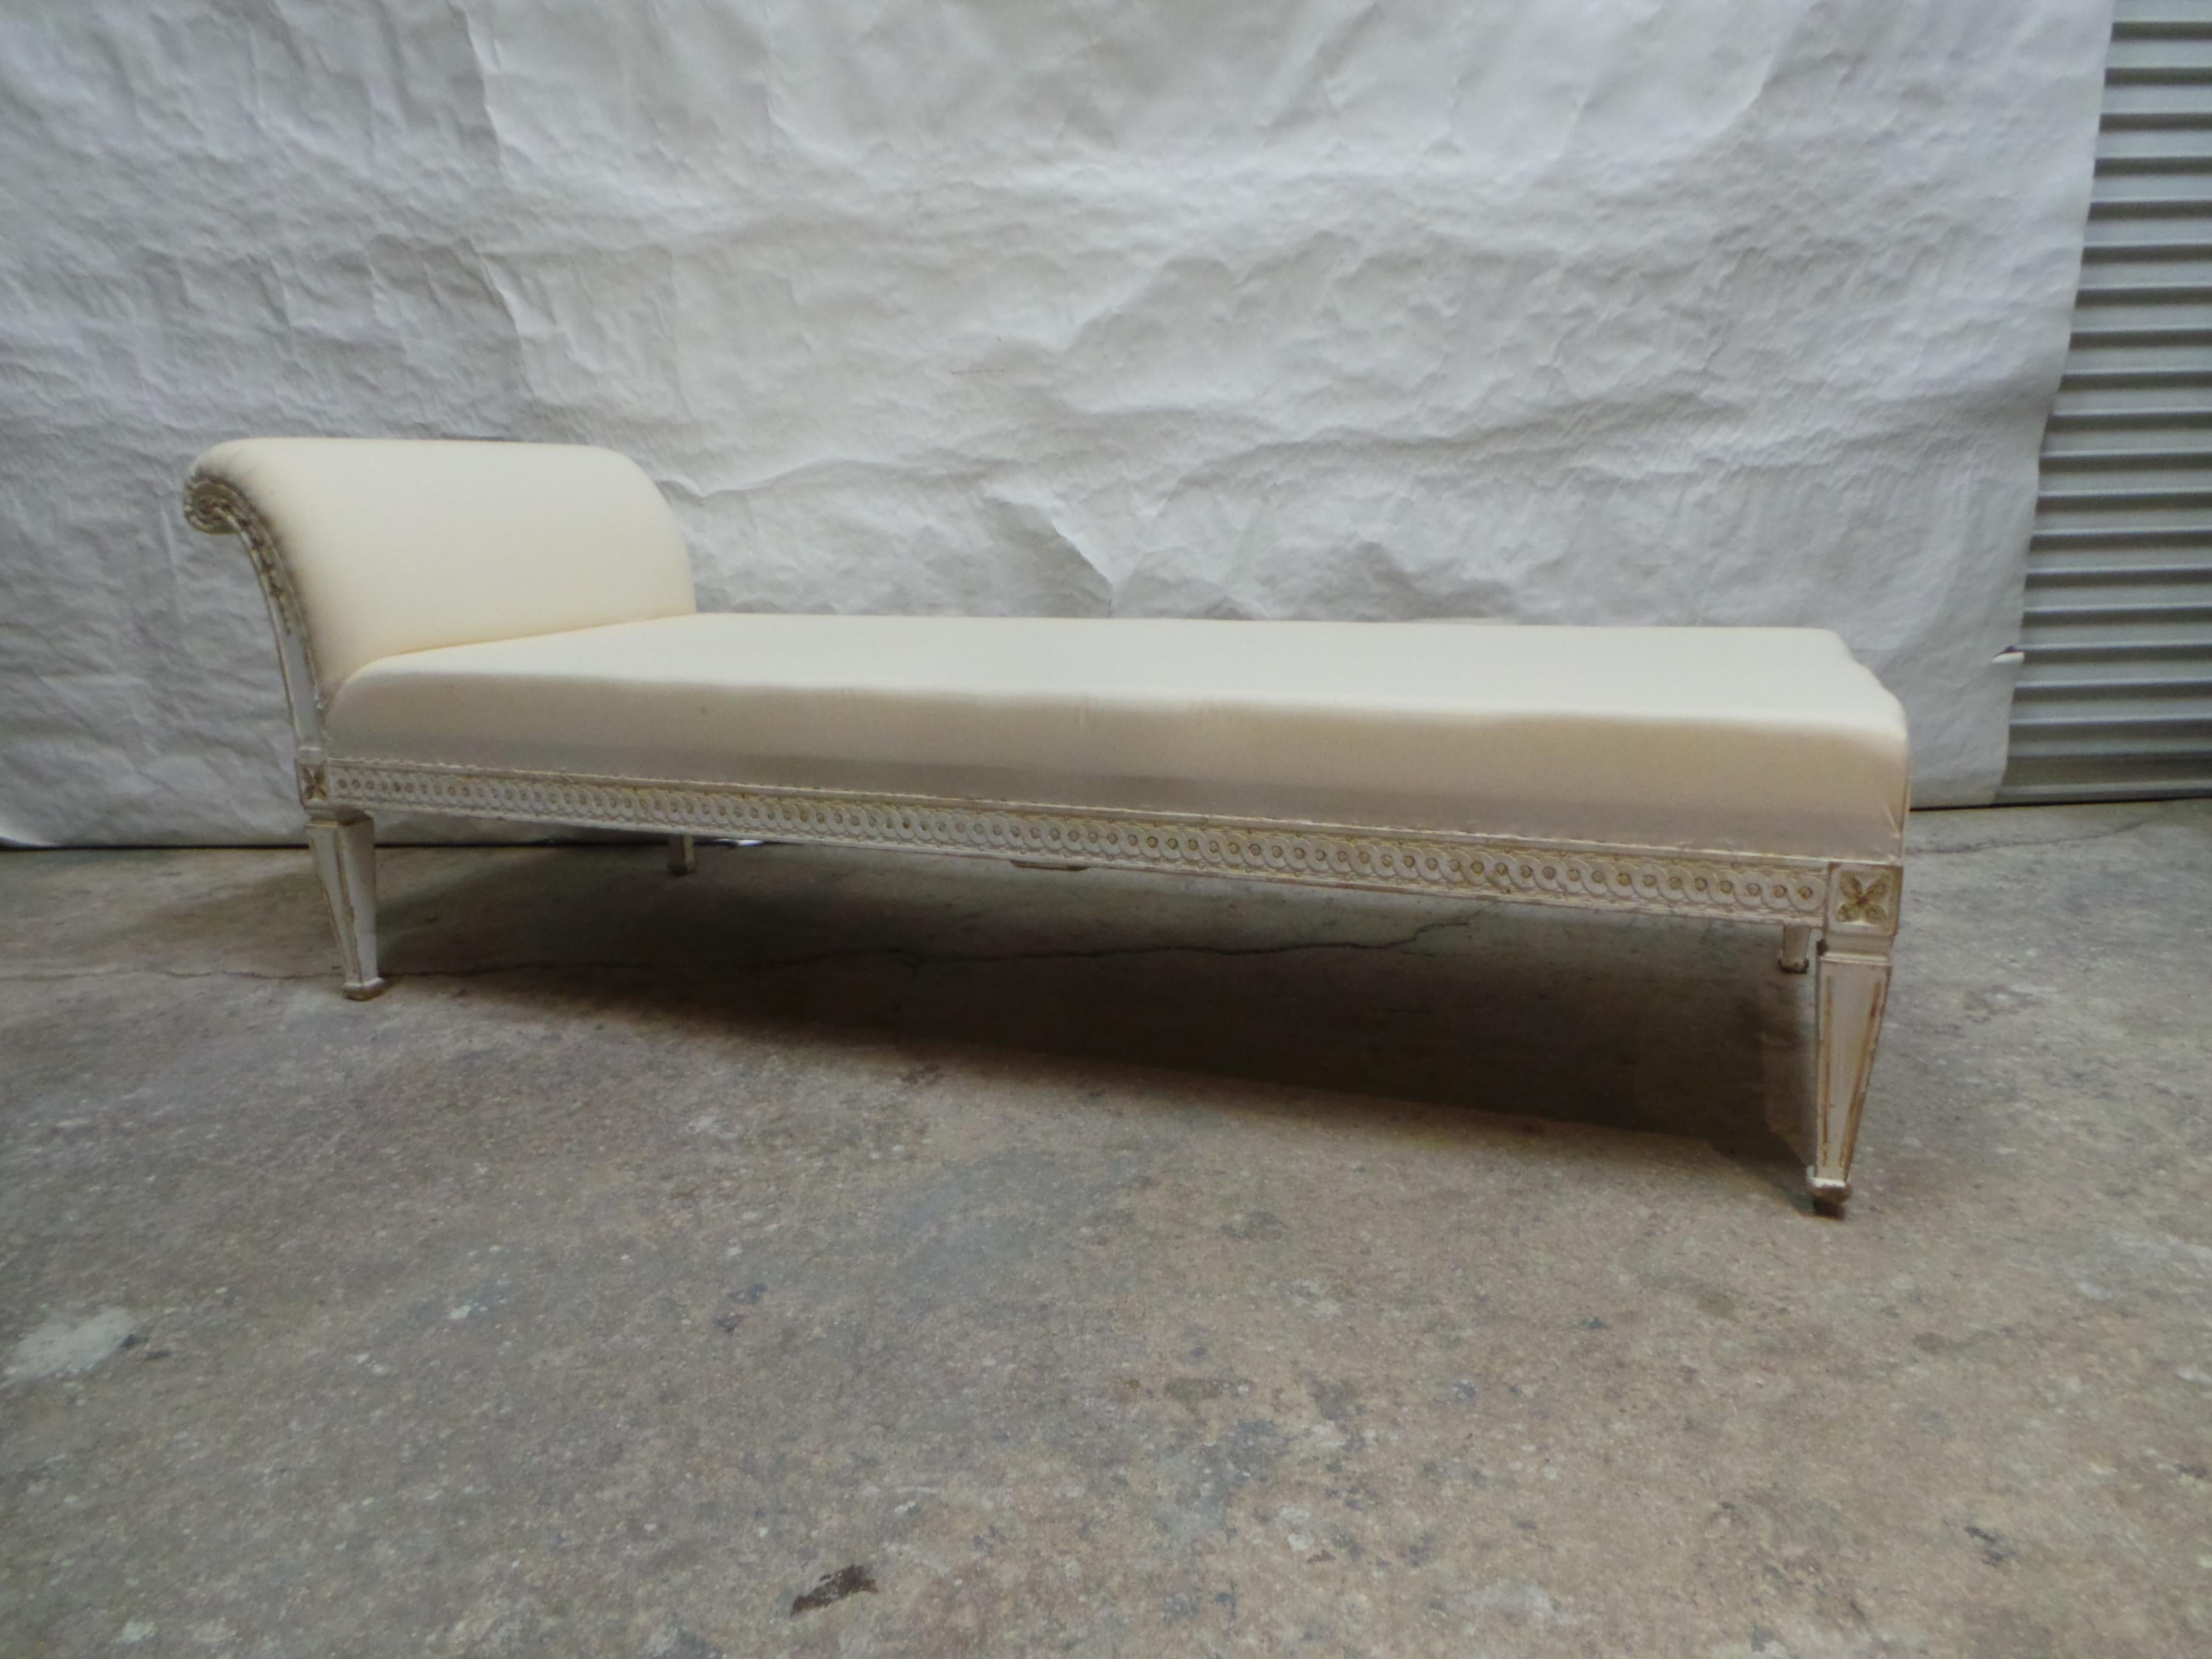 This is a Rare Original Painted Swedish Gustavian Chaise Lounge.  
the seating has been restored and covered in Muslin.